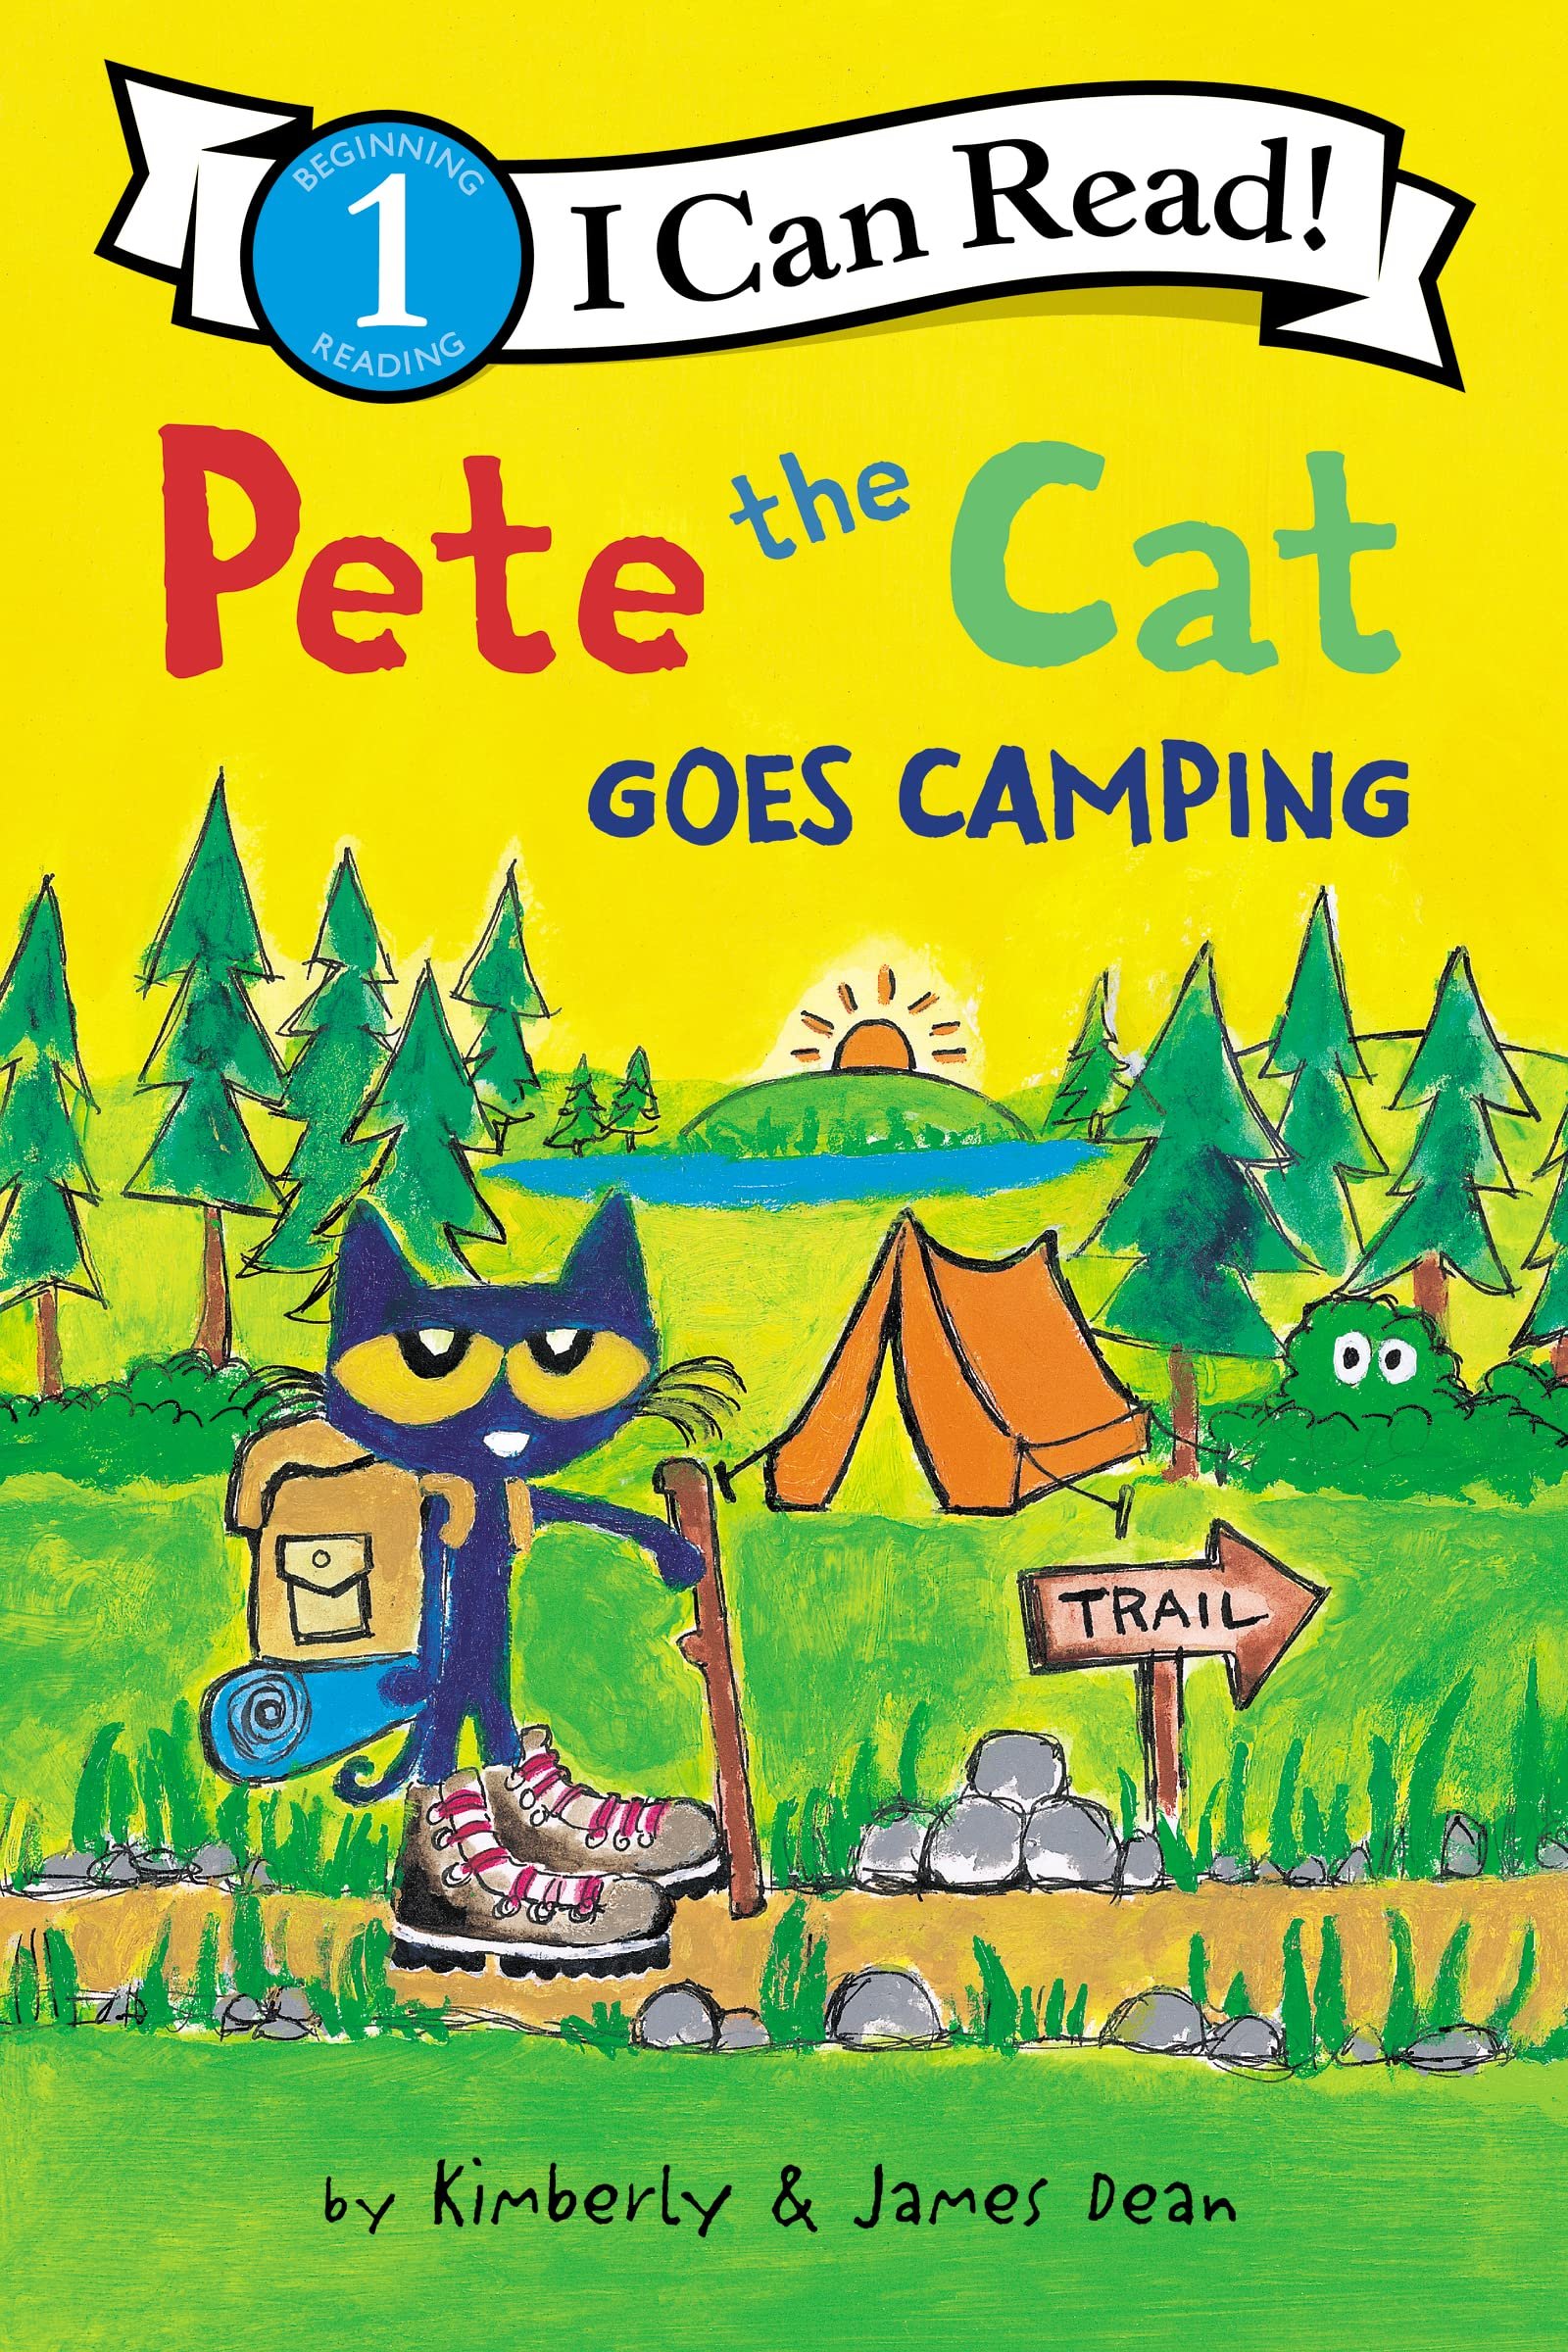 ONE Happy Camper: Baby Books About Camping